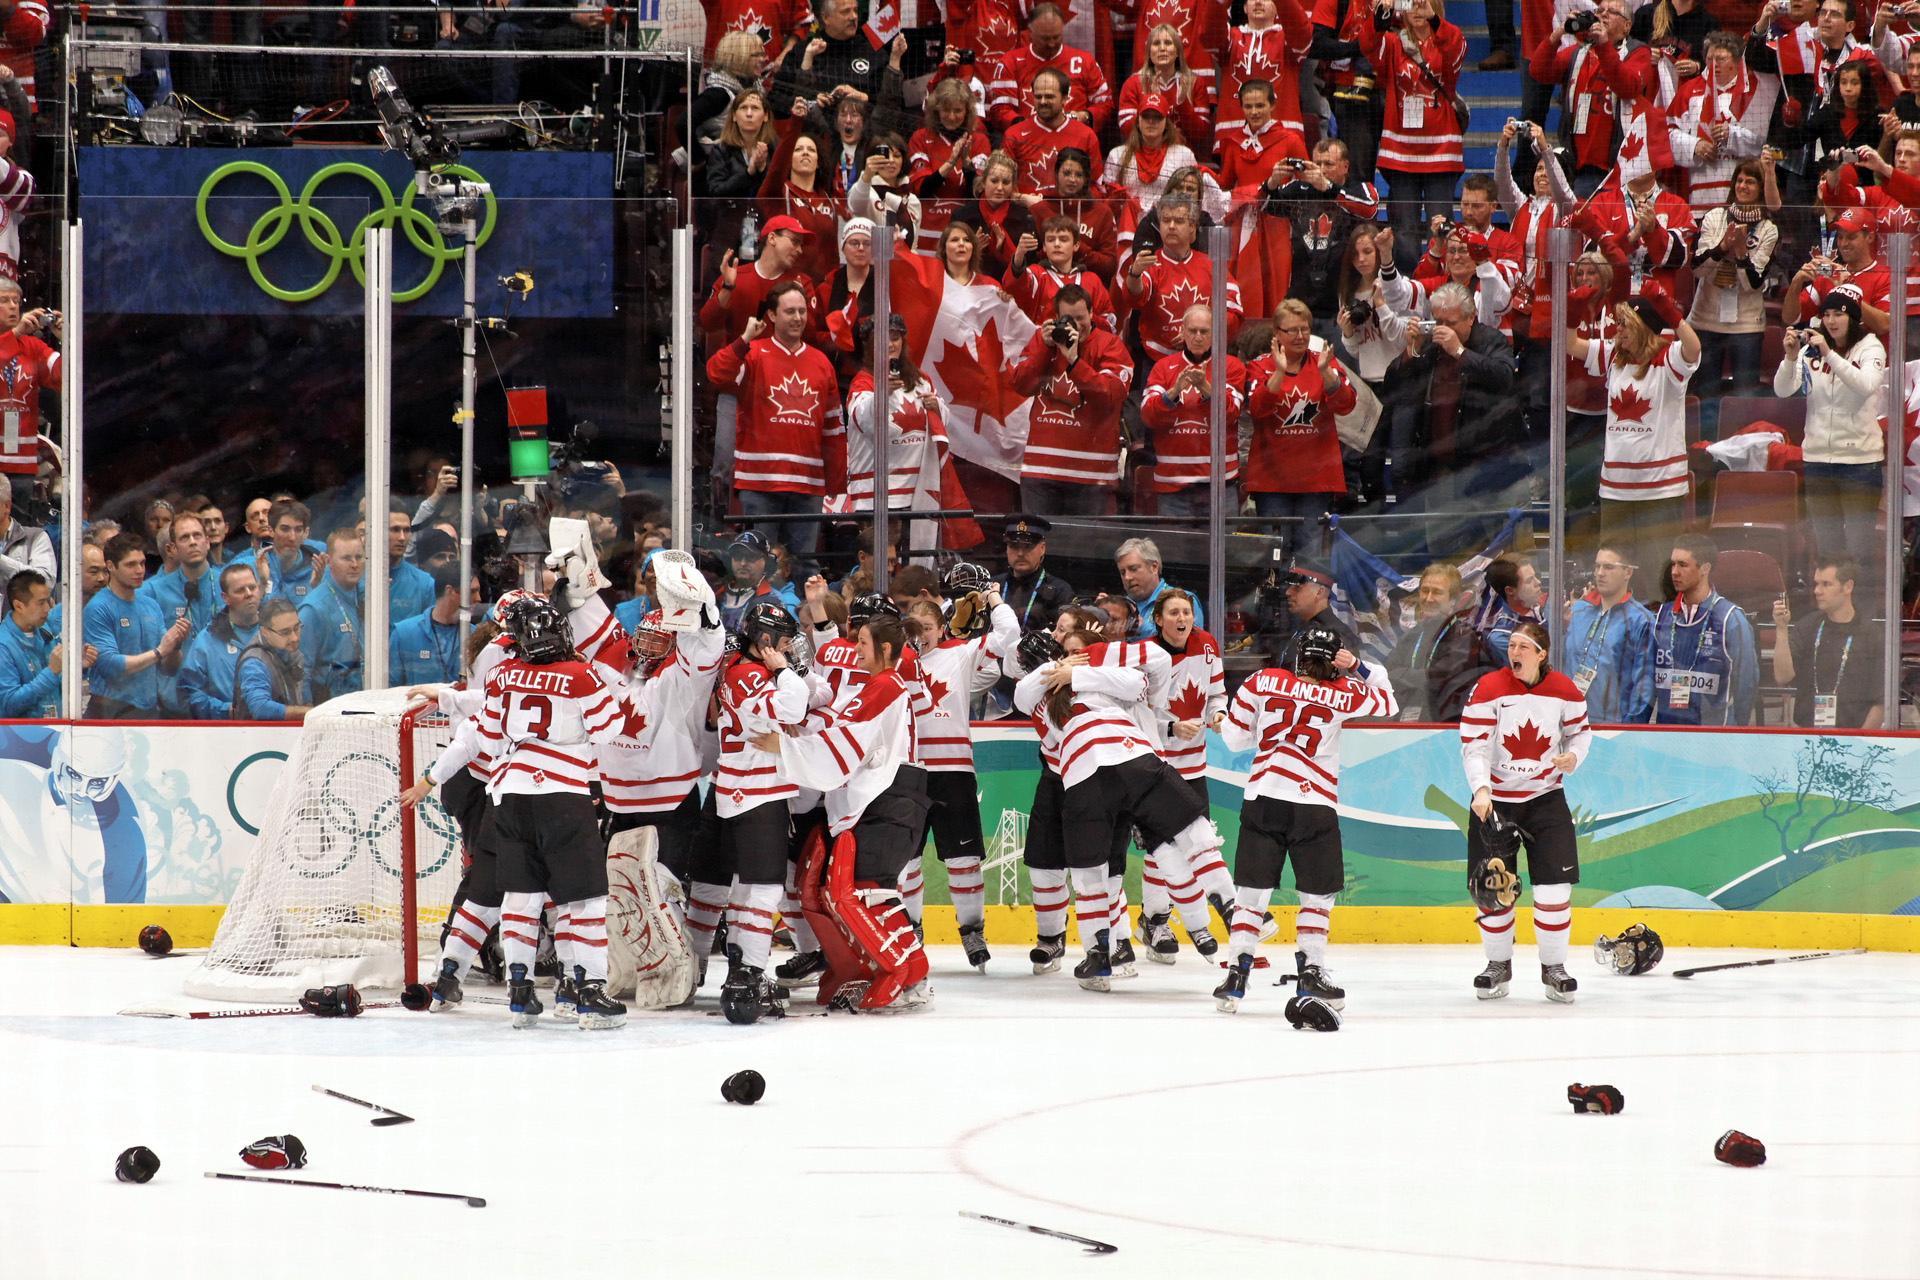 Canada Will Be Facing The USA In The Womens Gold Medal Hockey Game!